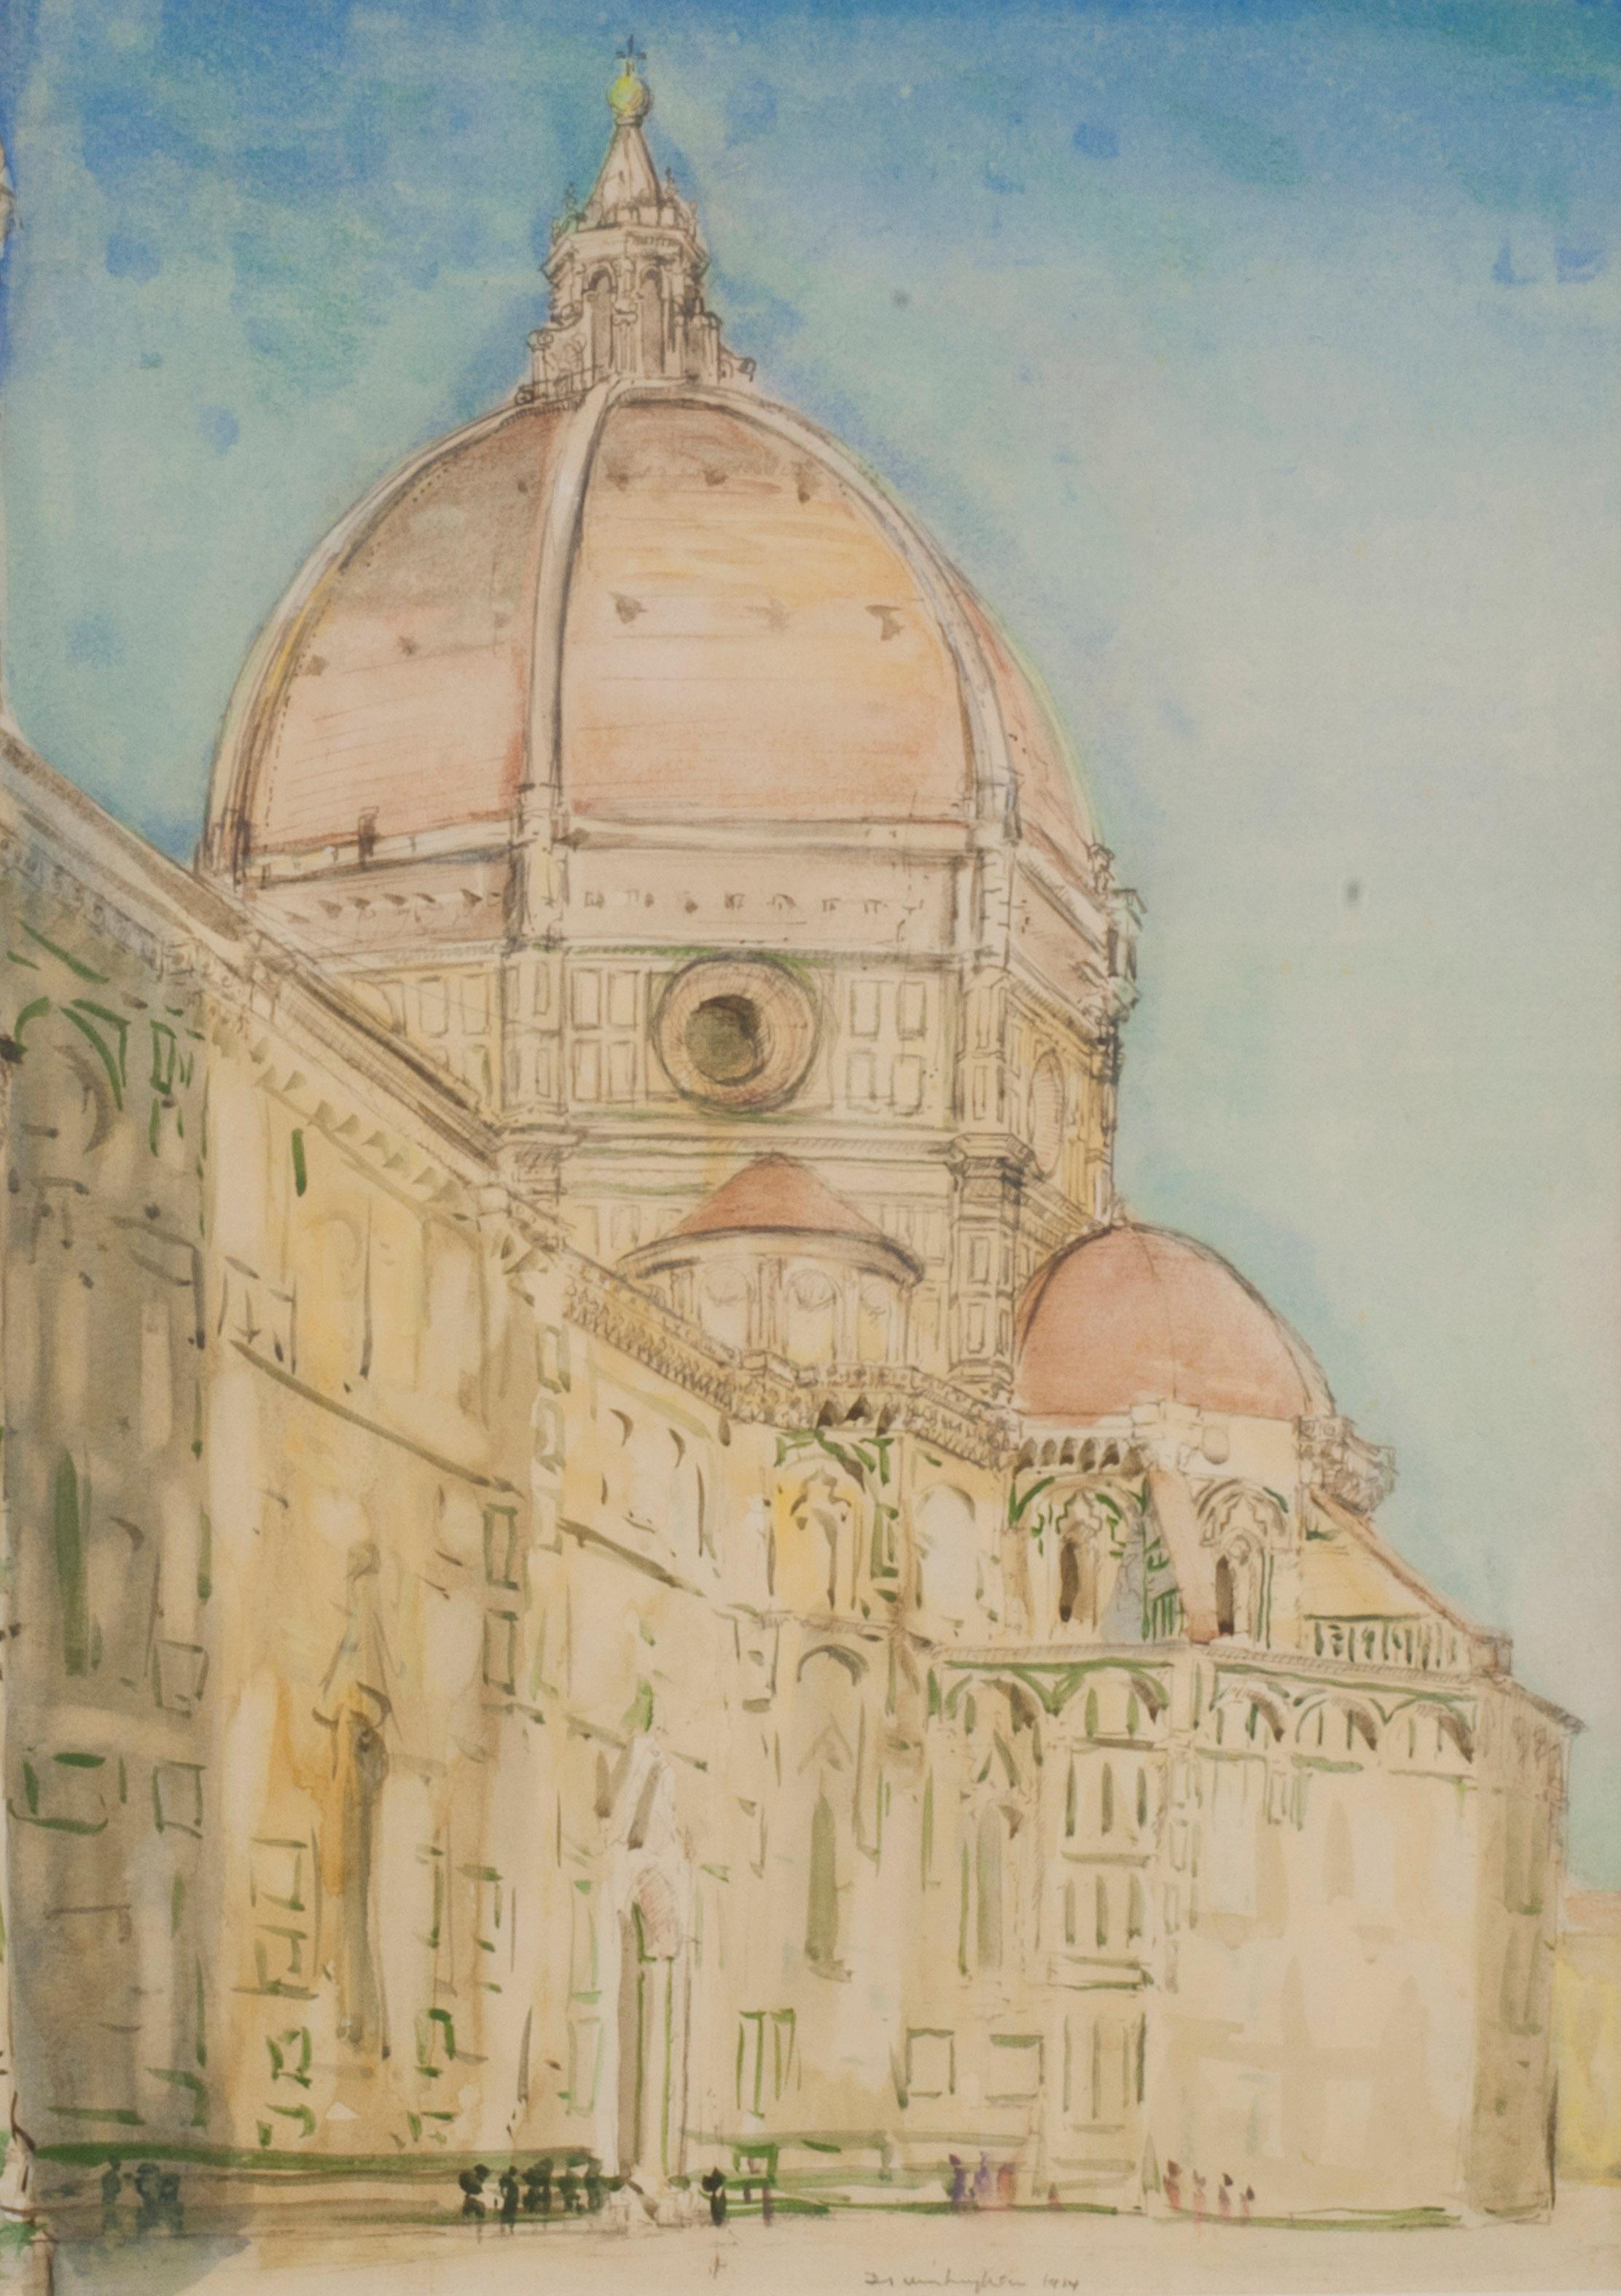 The Duomo, Florence
Watercolor, 1914
Signed and dated lower center edge (see photo)

Florence Cathedral, formally the Cattedrale di Santa Maria del Fiore, is the cathedral of Florence, Italy. It was begun in 1296 in the Gothic style to a design of